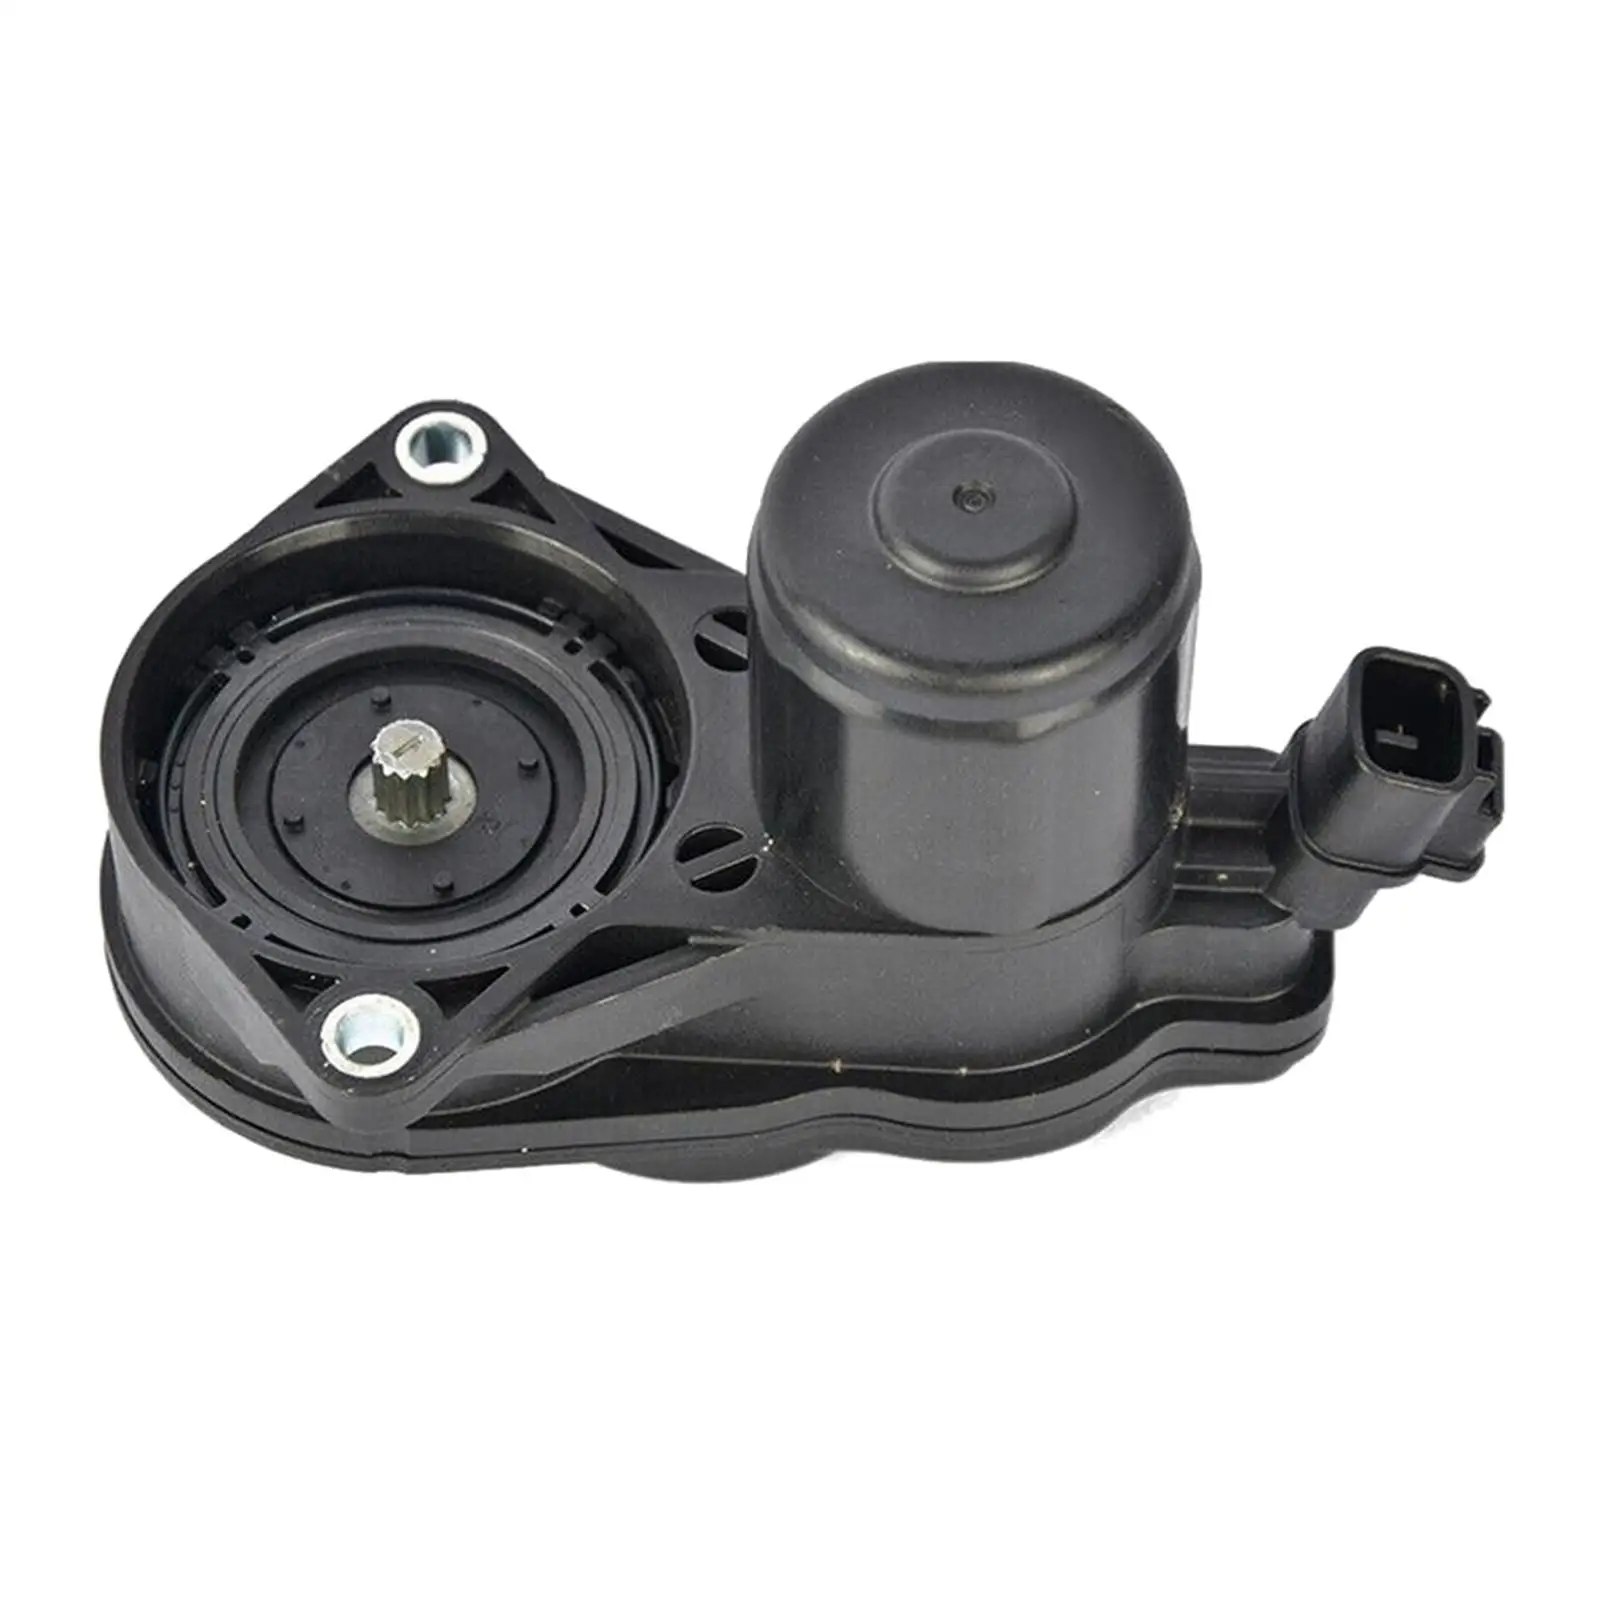 Parking Brake Actuator Assembly 46310-33010 replacement for toyota Corolla Sedan Avalon for highlander Exquisite Workmanship